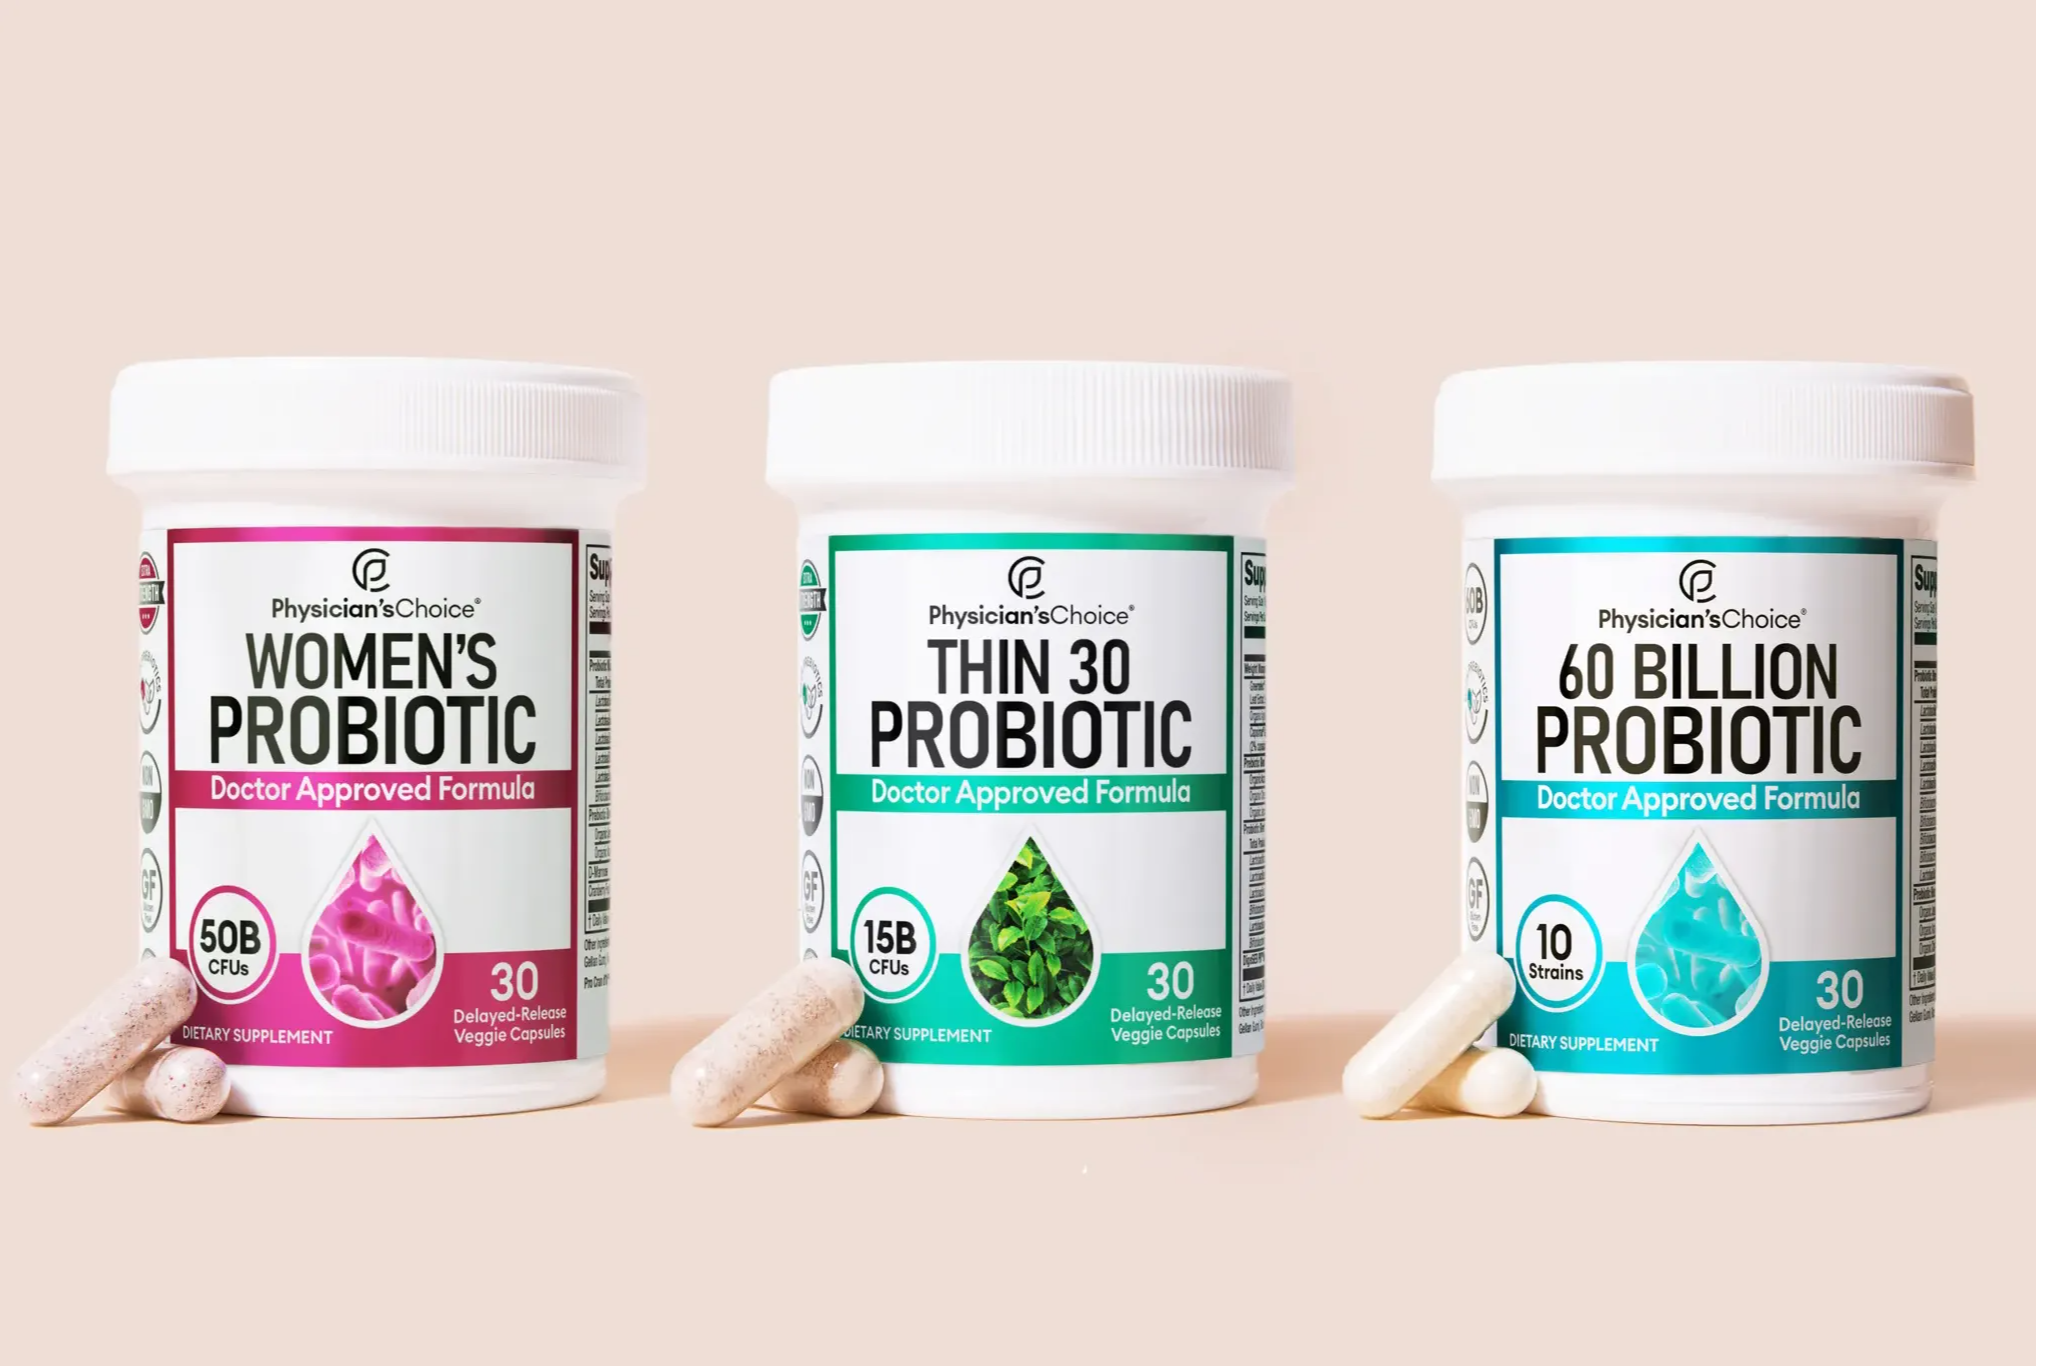 Physician's Choice Women's Probiotic, Thin 30 Probiotic and 60 Billion Probiotic